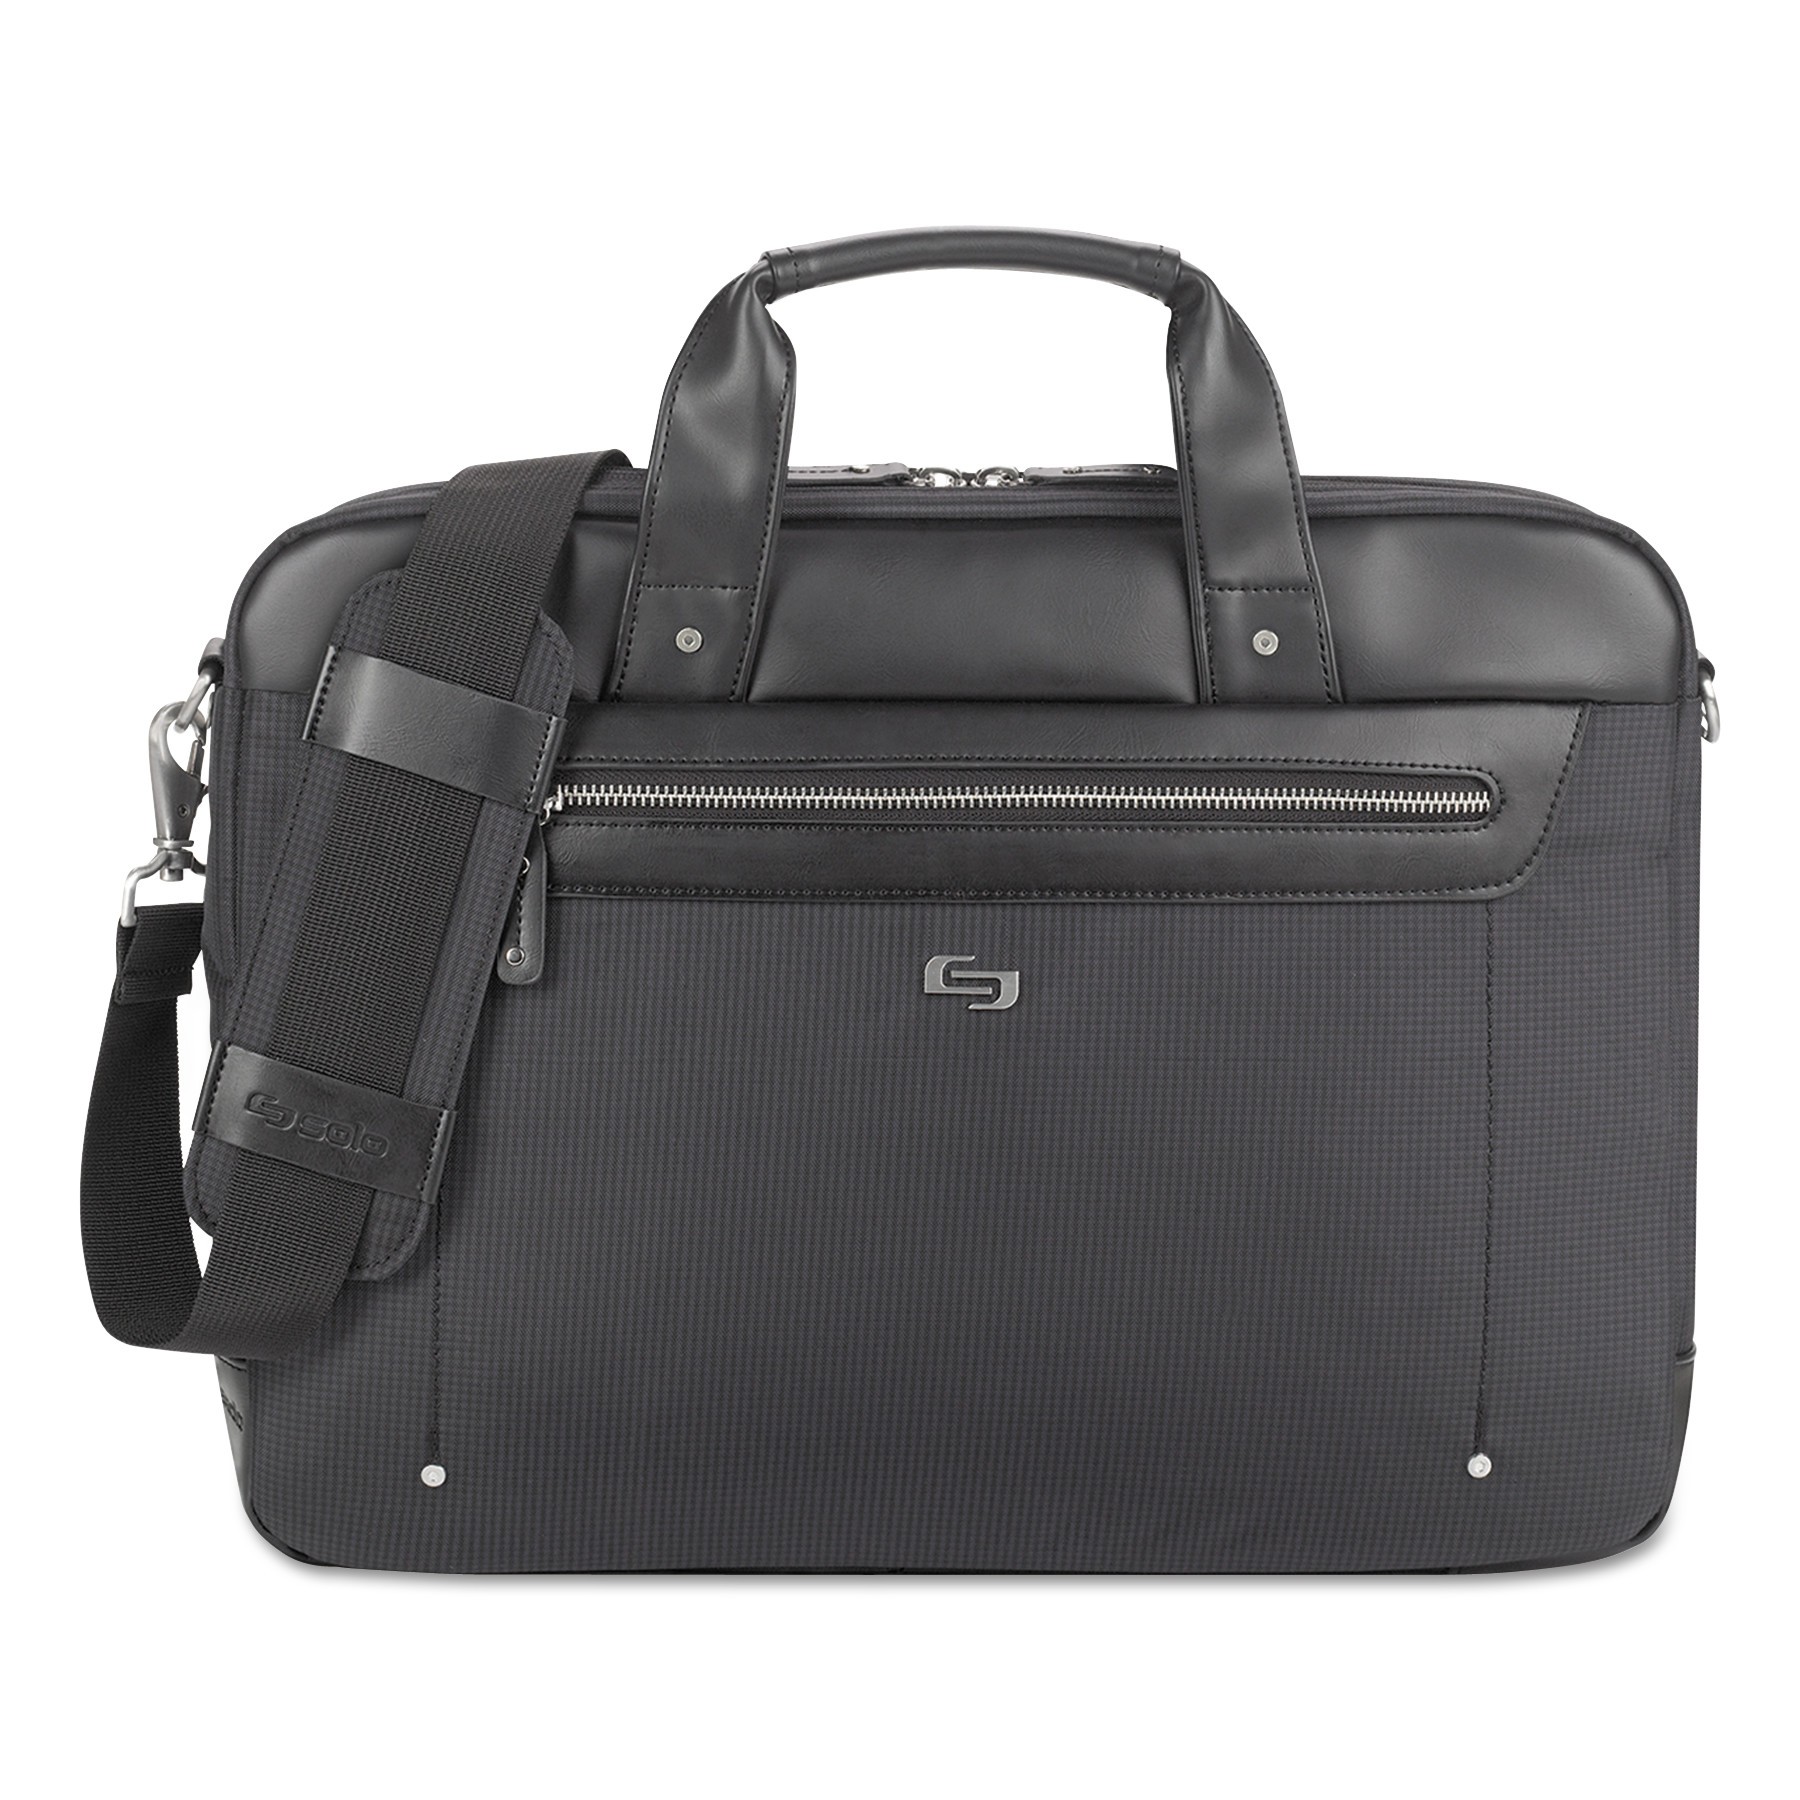 Irving Briefcase, 16.54" x 2.36" x 13.39", Polyester, Black